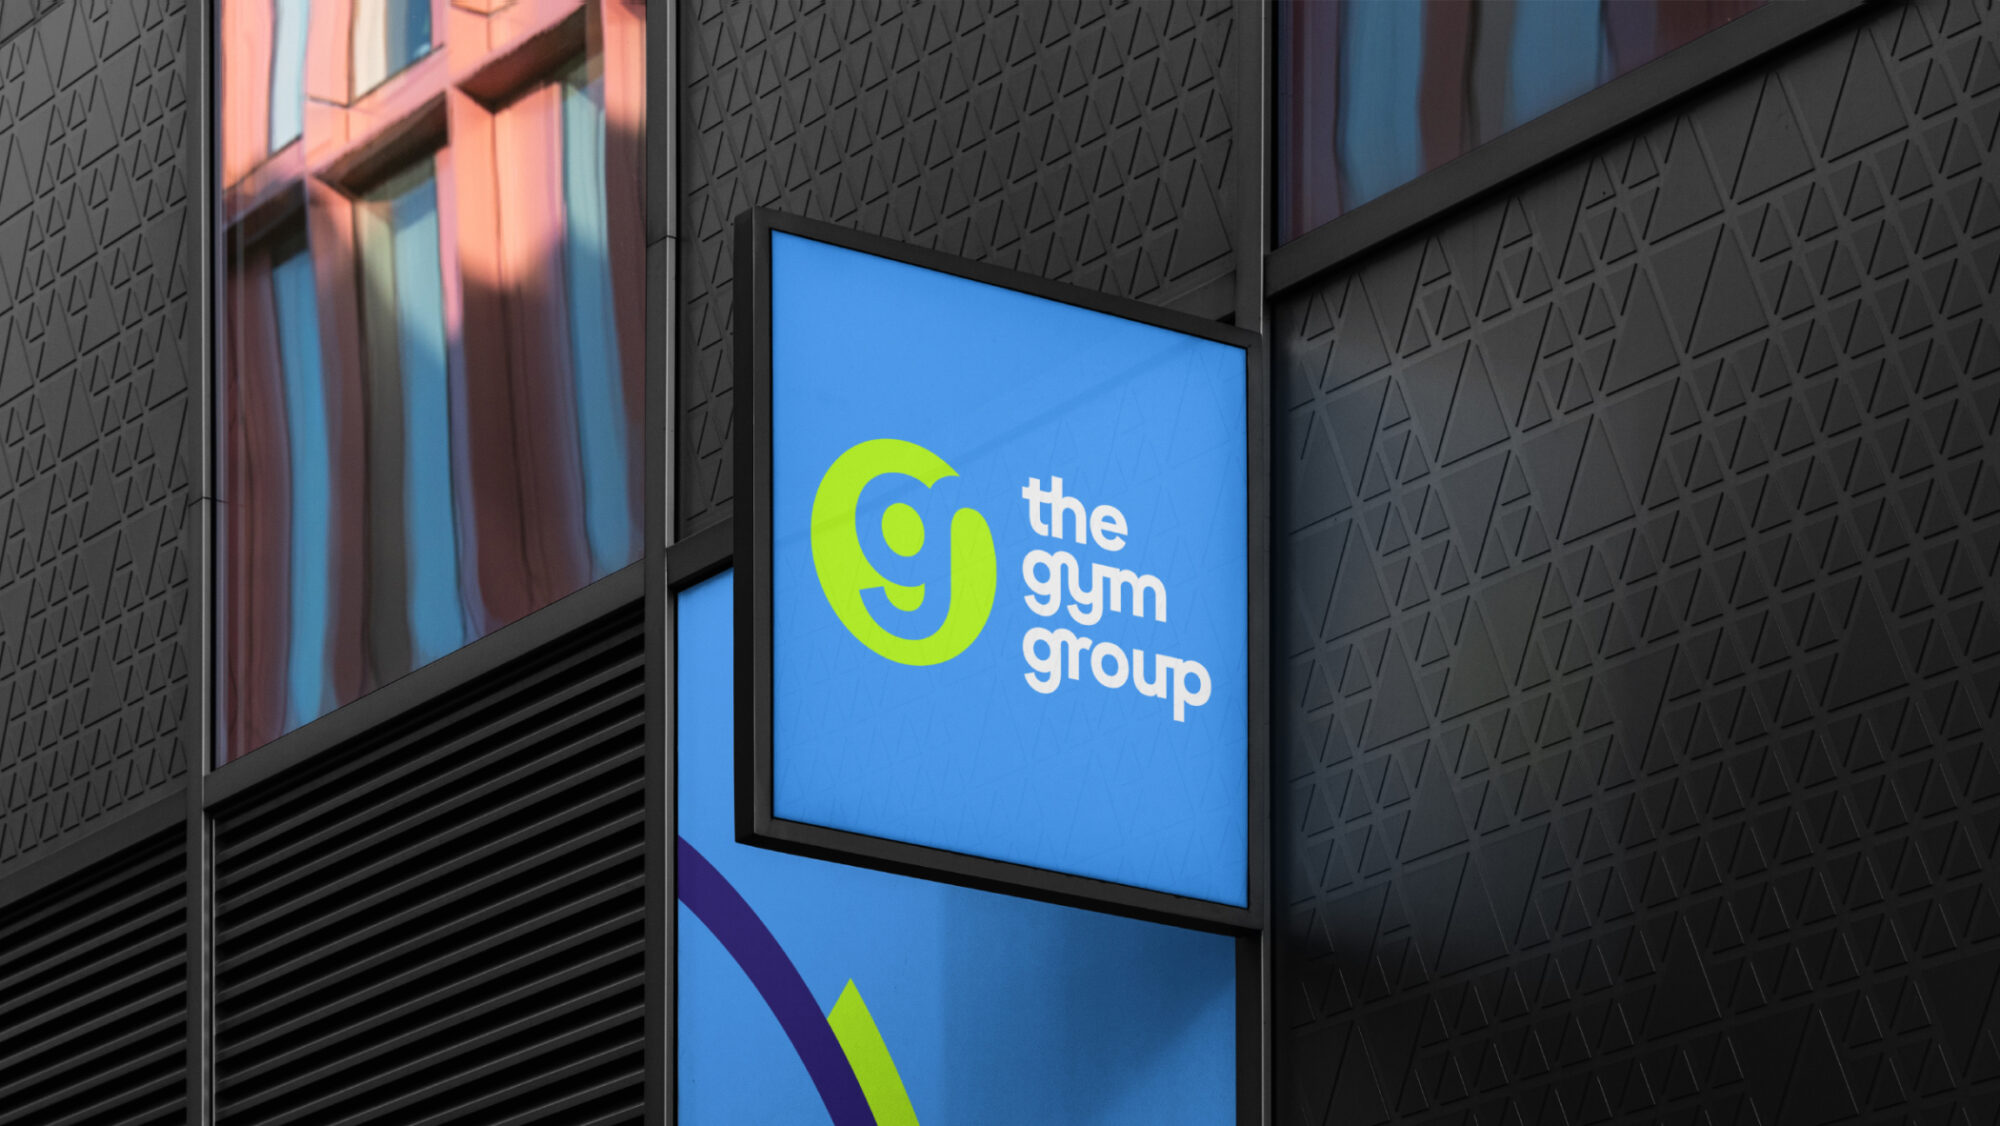 The Gym Group rebrand tells a story of connection and community